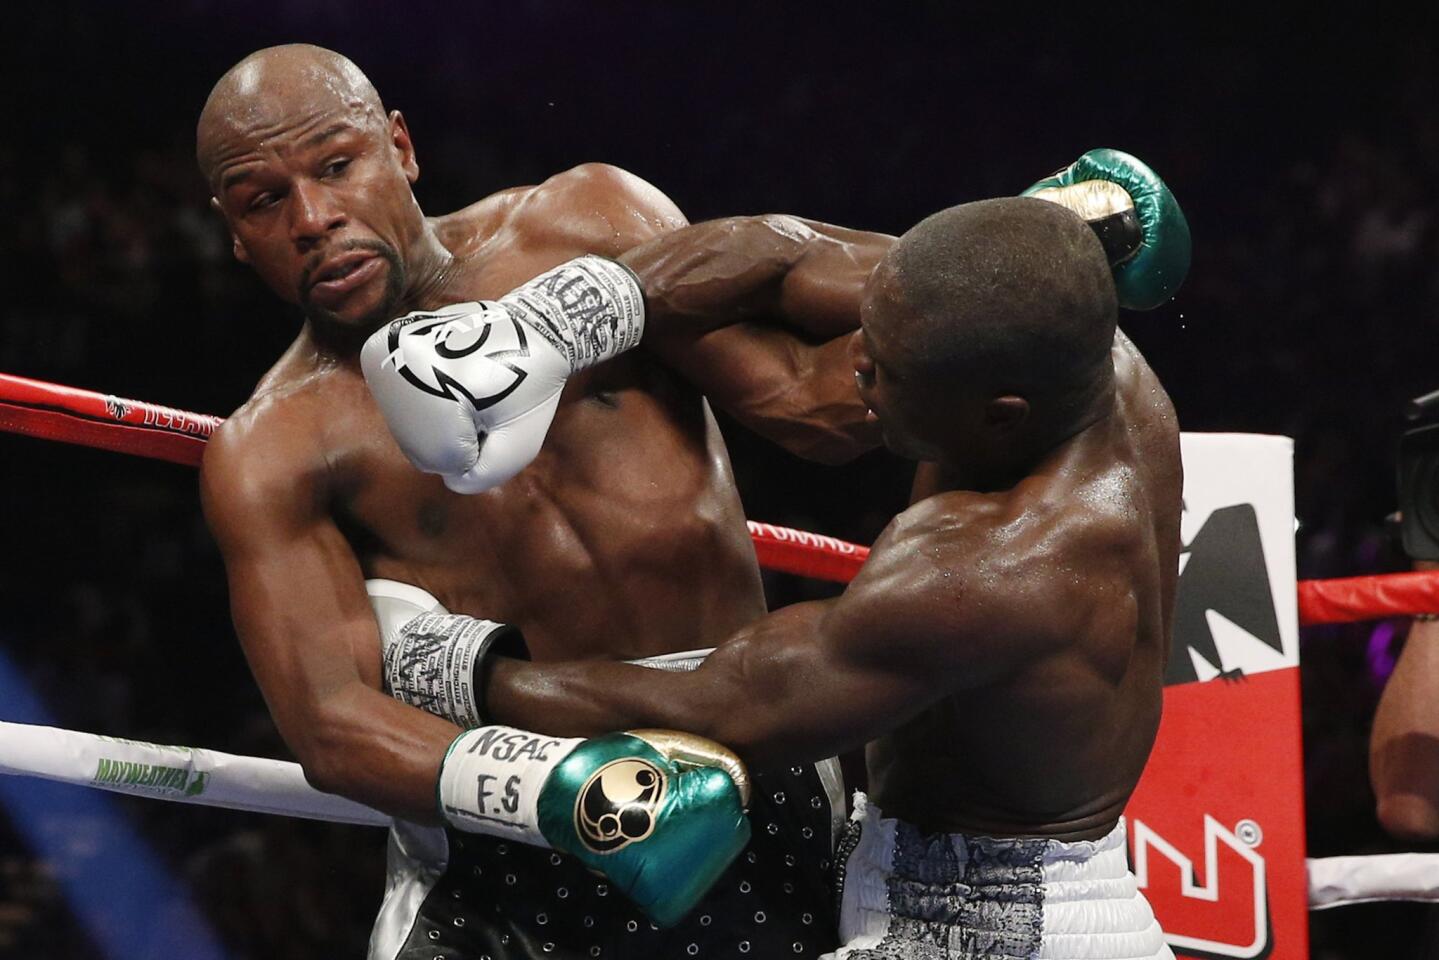 Andre Berto, right, lands a right to the head of Floyd Mayweather Jr. during their welterweight title boxing bout Saturday.